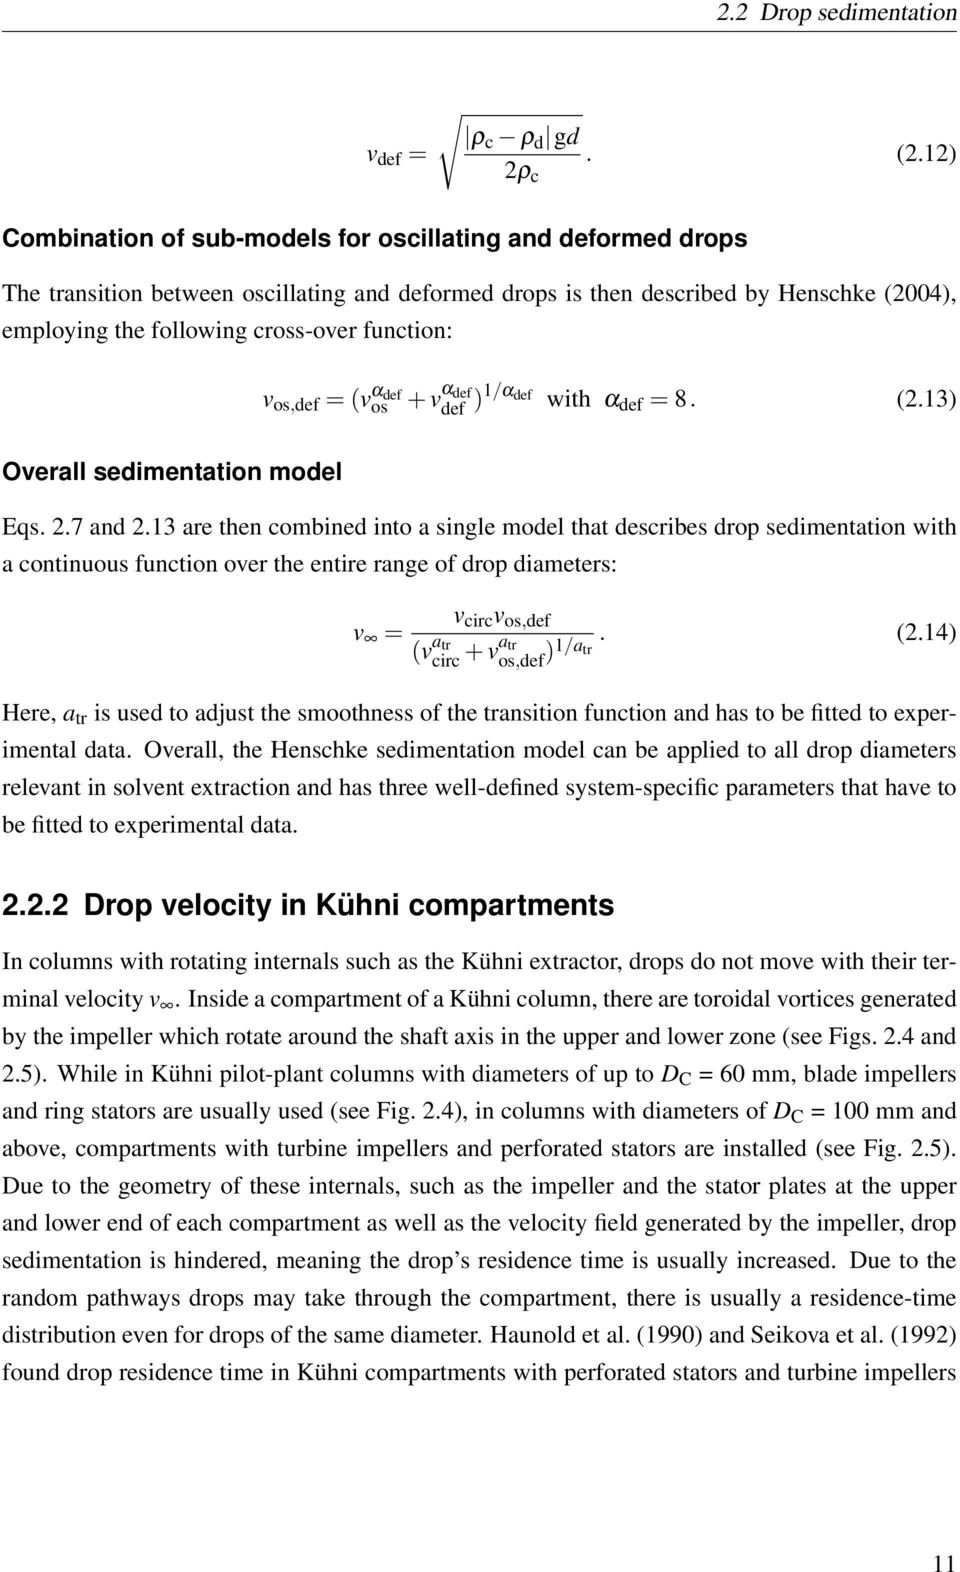 function: v os,def = (v α def os Overall sedimentation model + v α def def )1/α def with α def = 8. (2.13) Eqs. 2.7 and 2.